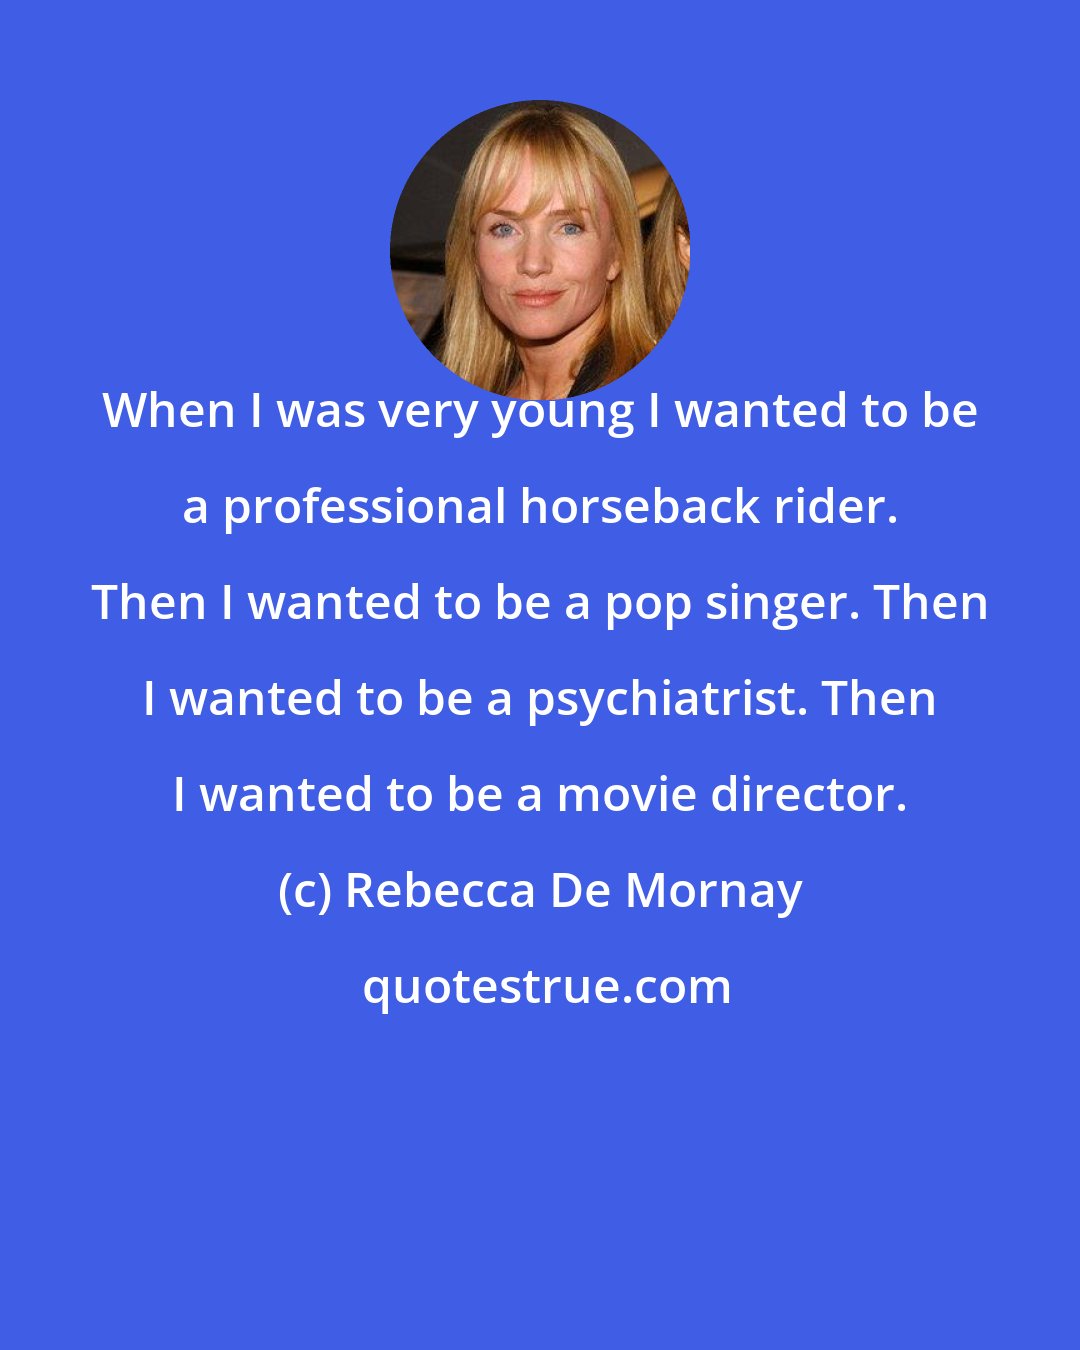 Rebecca De Mornay: When I was very young I wanted to be a professional horseback rider. Then I wanted to be a pop singer. Then I wanted to be a psychiatrist. Then I wanted to be a movie director.